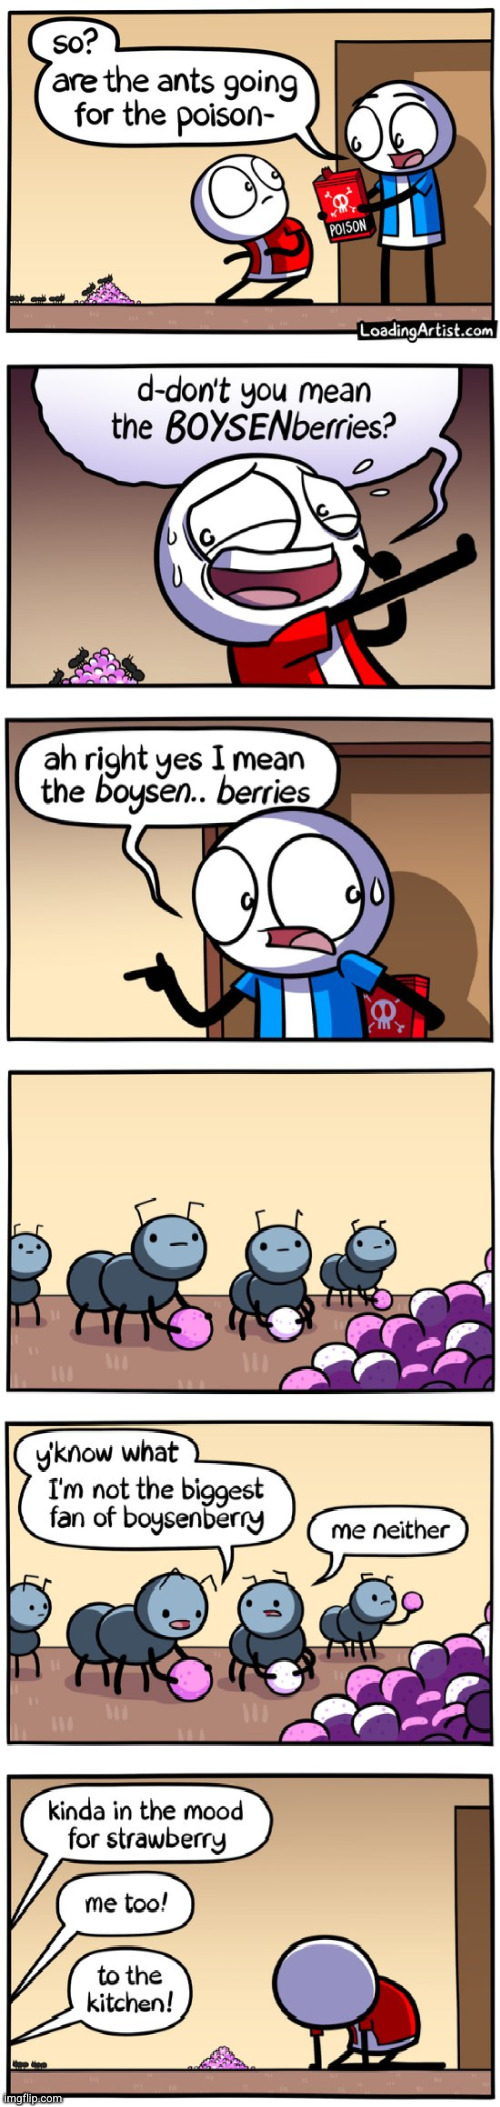 #3,464 | image tagged in comics/cartoons,comics,loading,artist,poison,ants | made w/ Imgflip meme maker